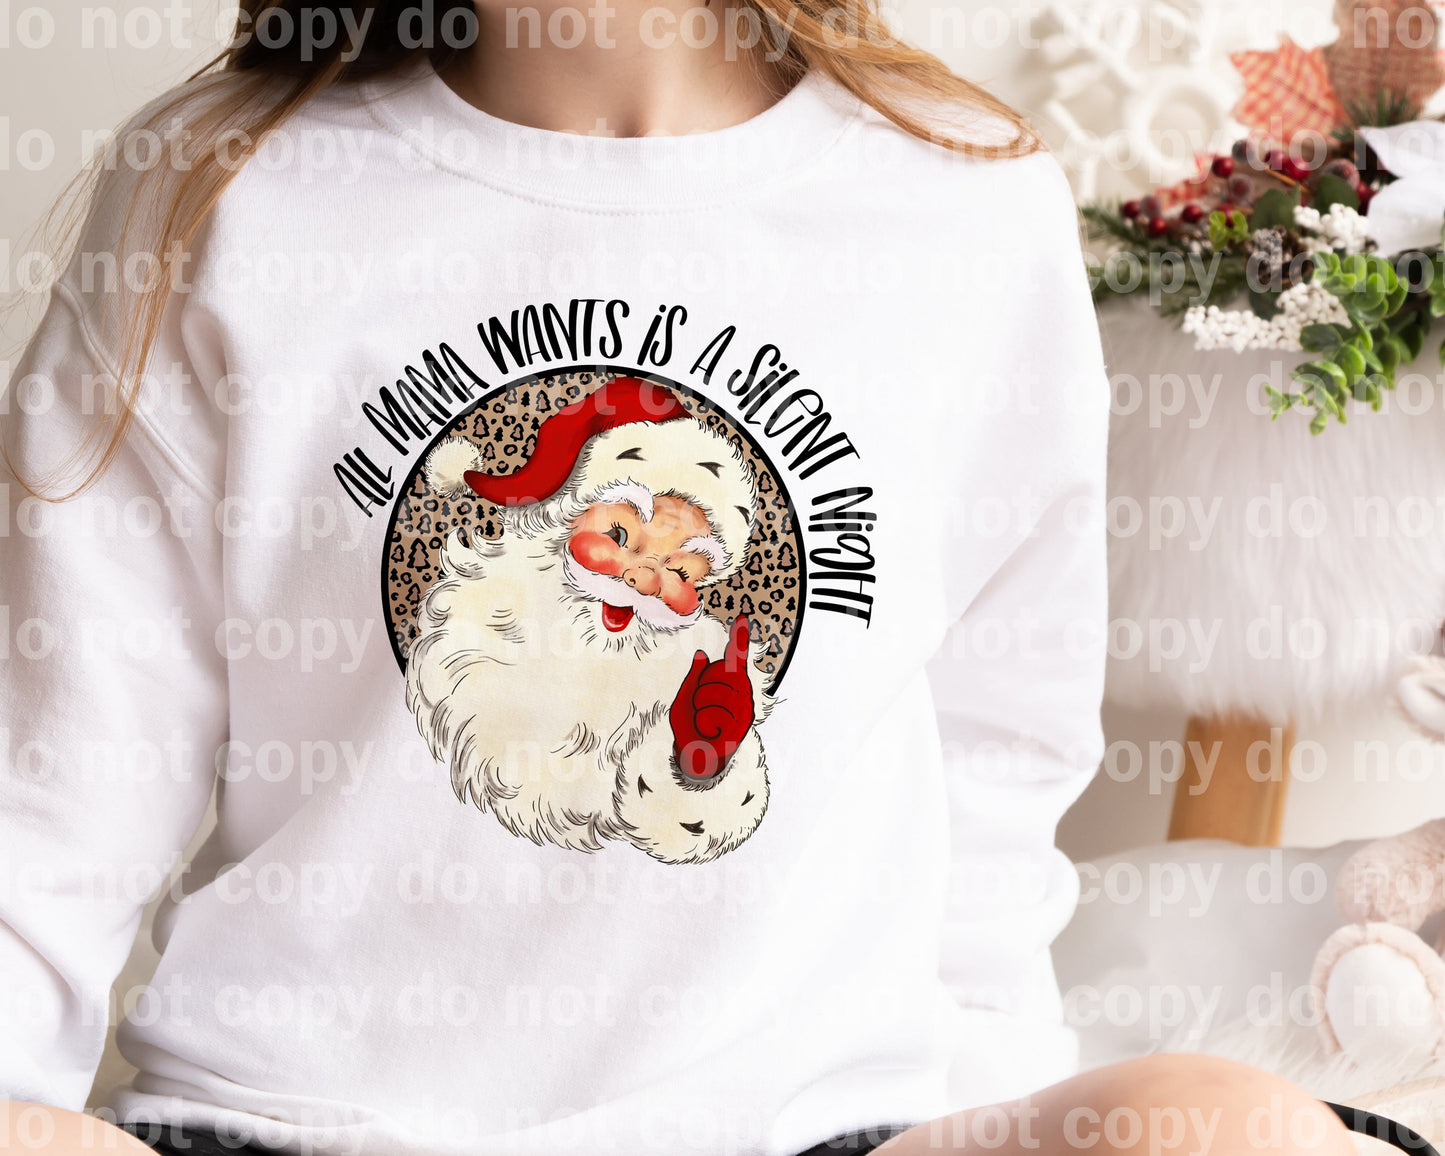 All Mama Wants Is A Silent Night Wink Santa Dream Print or Sublimation Print